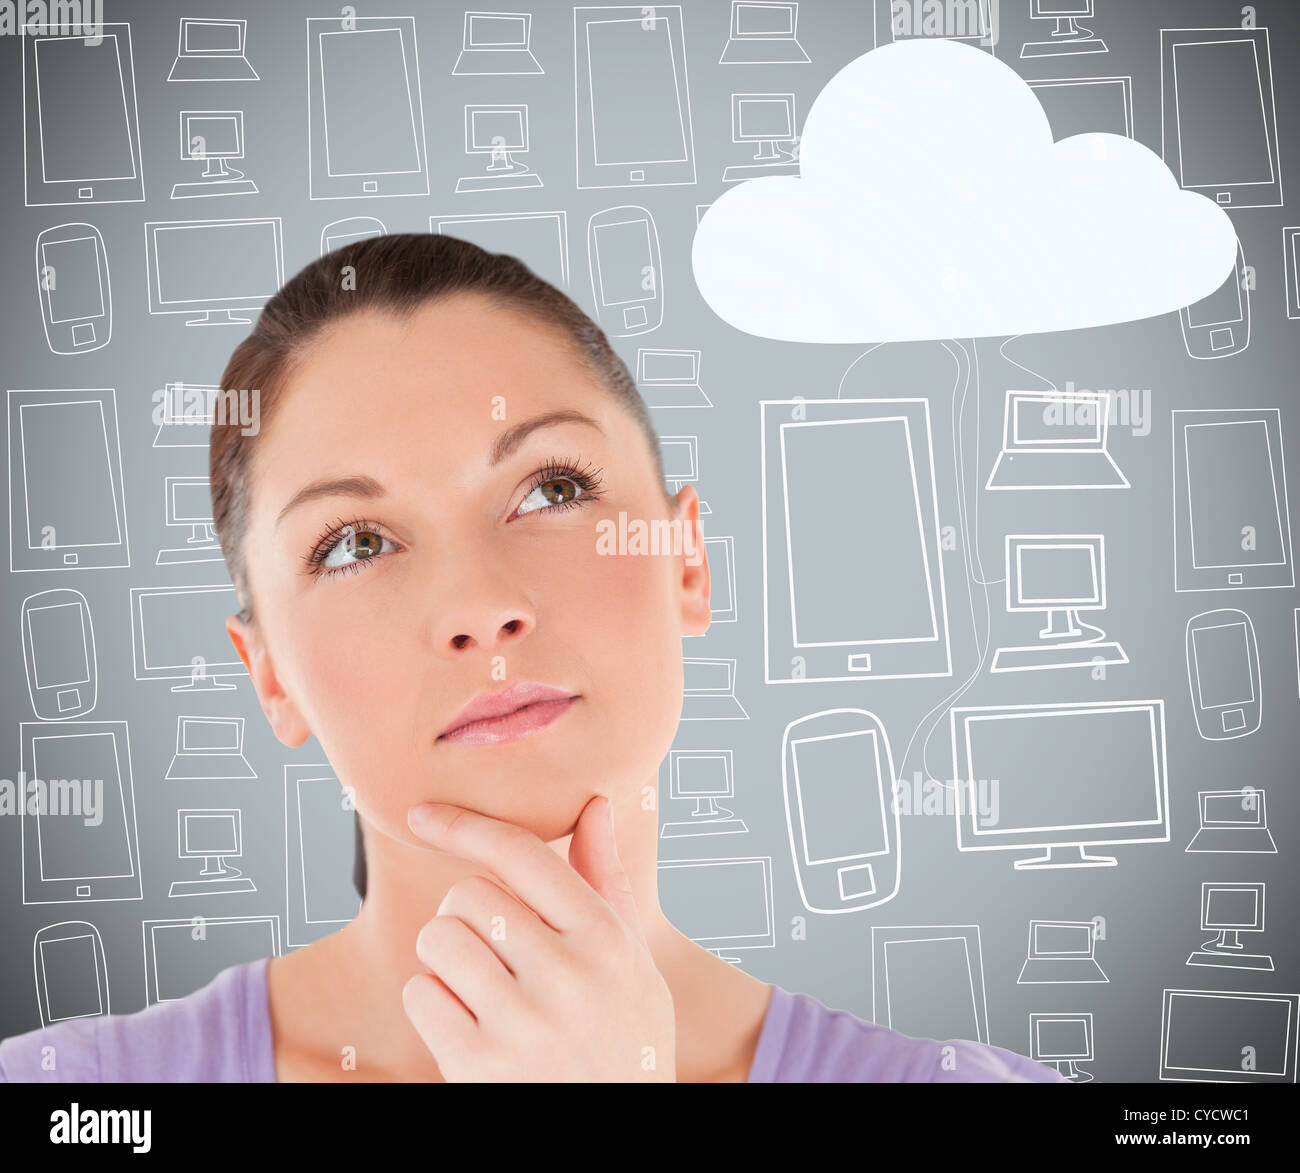 Woman with hand on chin thinking about cloud computing Stock Photo